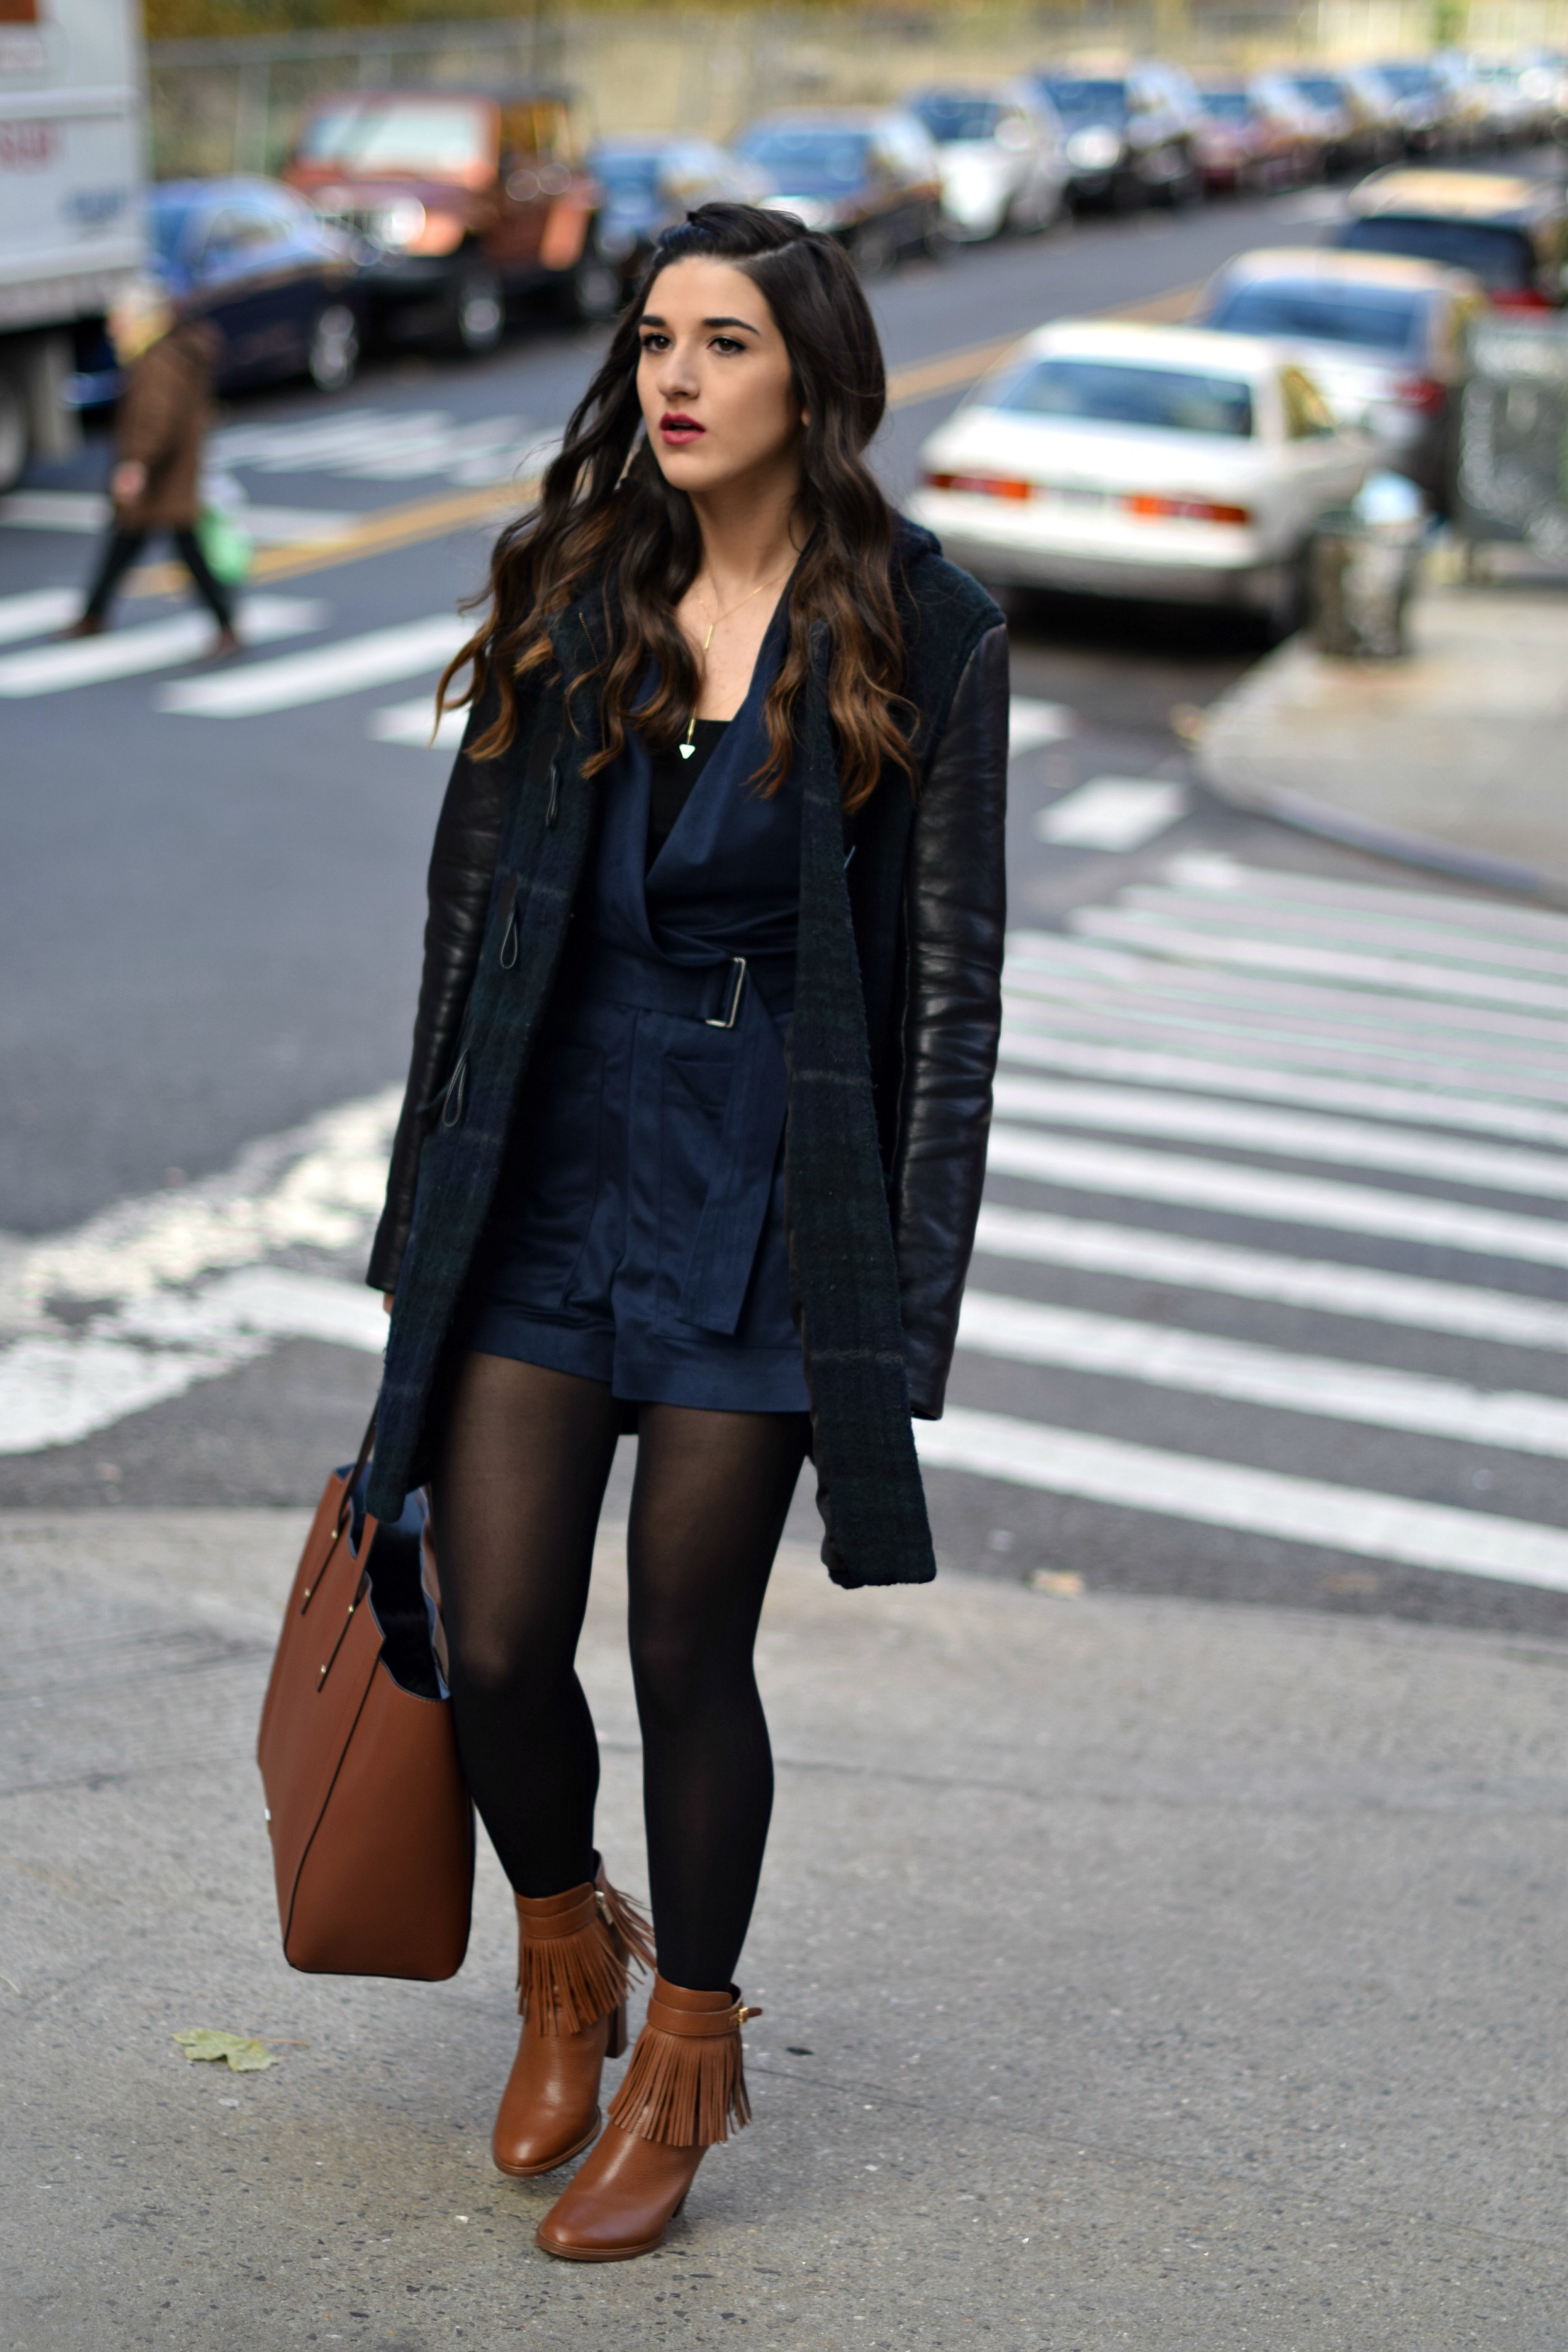 Navy Romper Fringe Booties Louboutins & Love Fashion Blog Esther Santer NYC Street Style Blogger Zara Plaid Coat Leather Sleeves Girl Women OOTD Outfit Accessories Soho Tote Ivanka Trump Black Tights Boots Shoes Winter Hair Braid Inspo Jewelry Rings.jpg